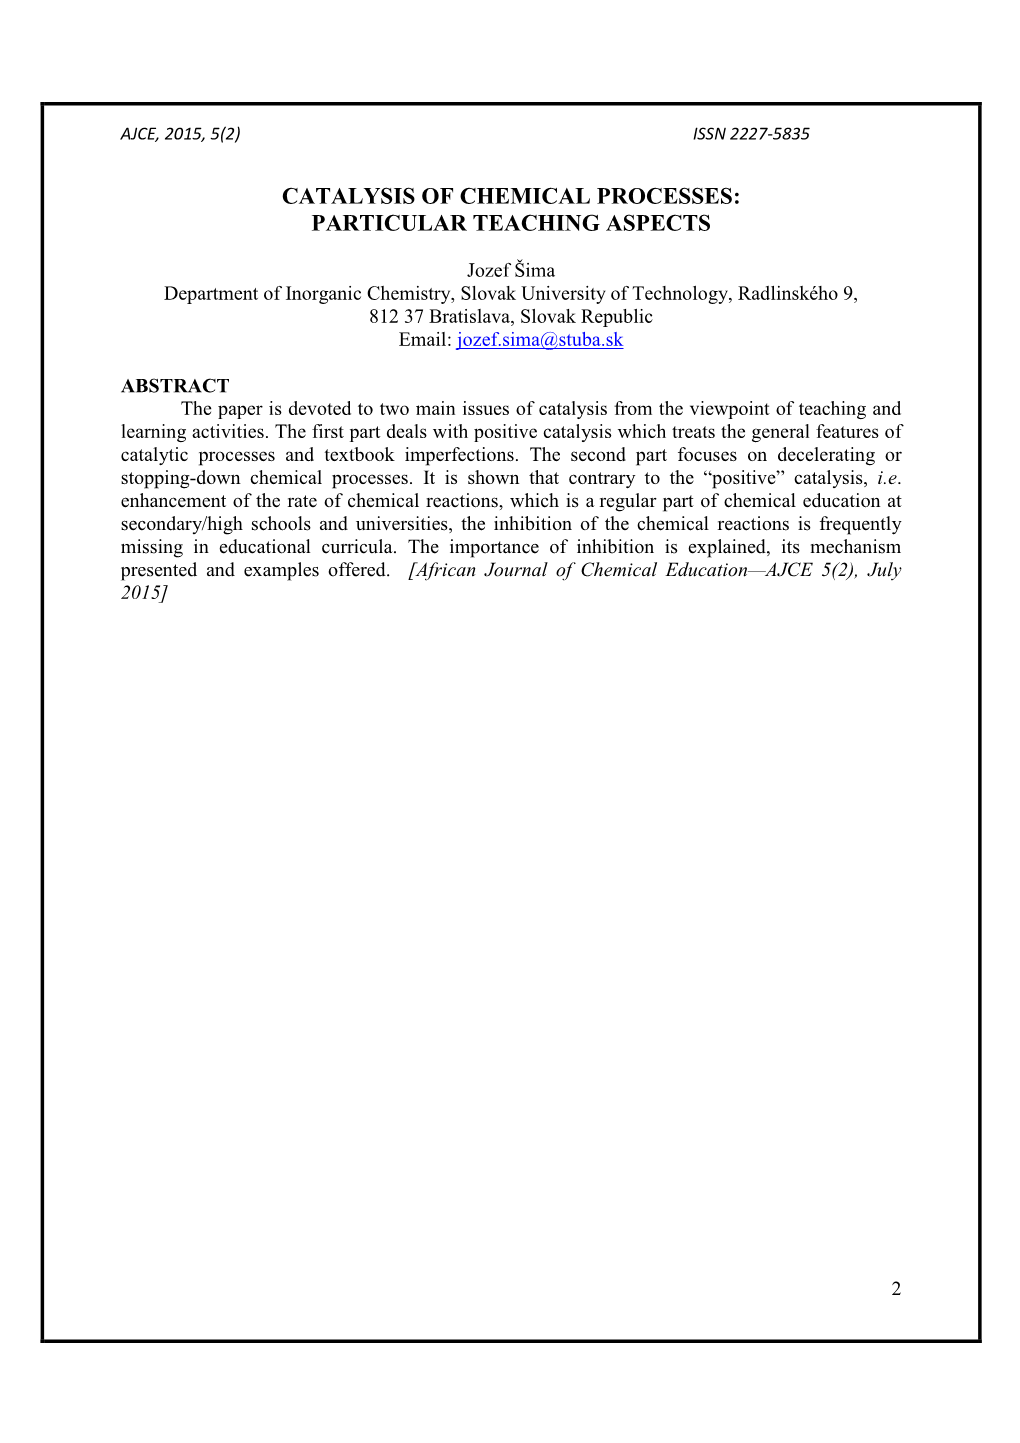 Catalysis of Chemical Processes: Particular Teaching Aspects